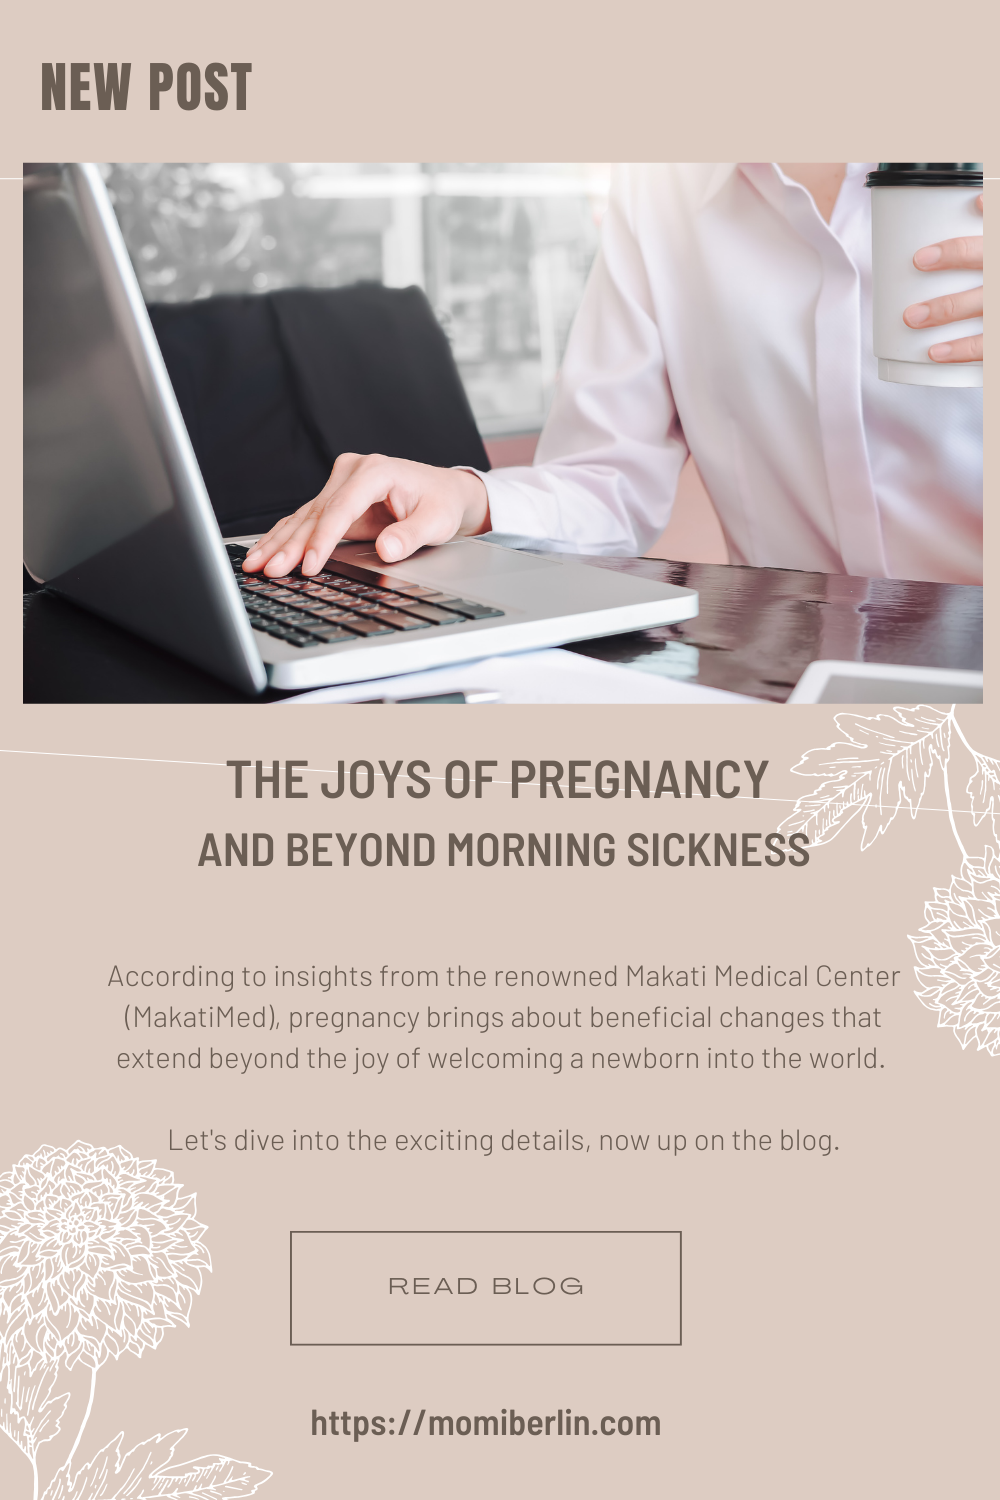 The JOys of Pregnancy and beyond morning sickness